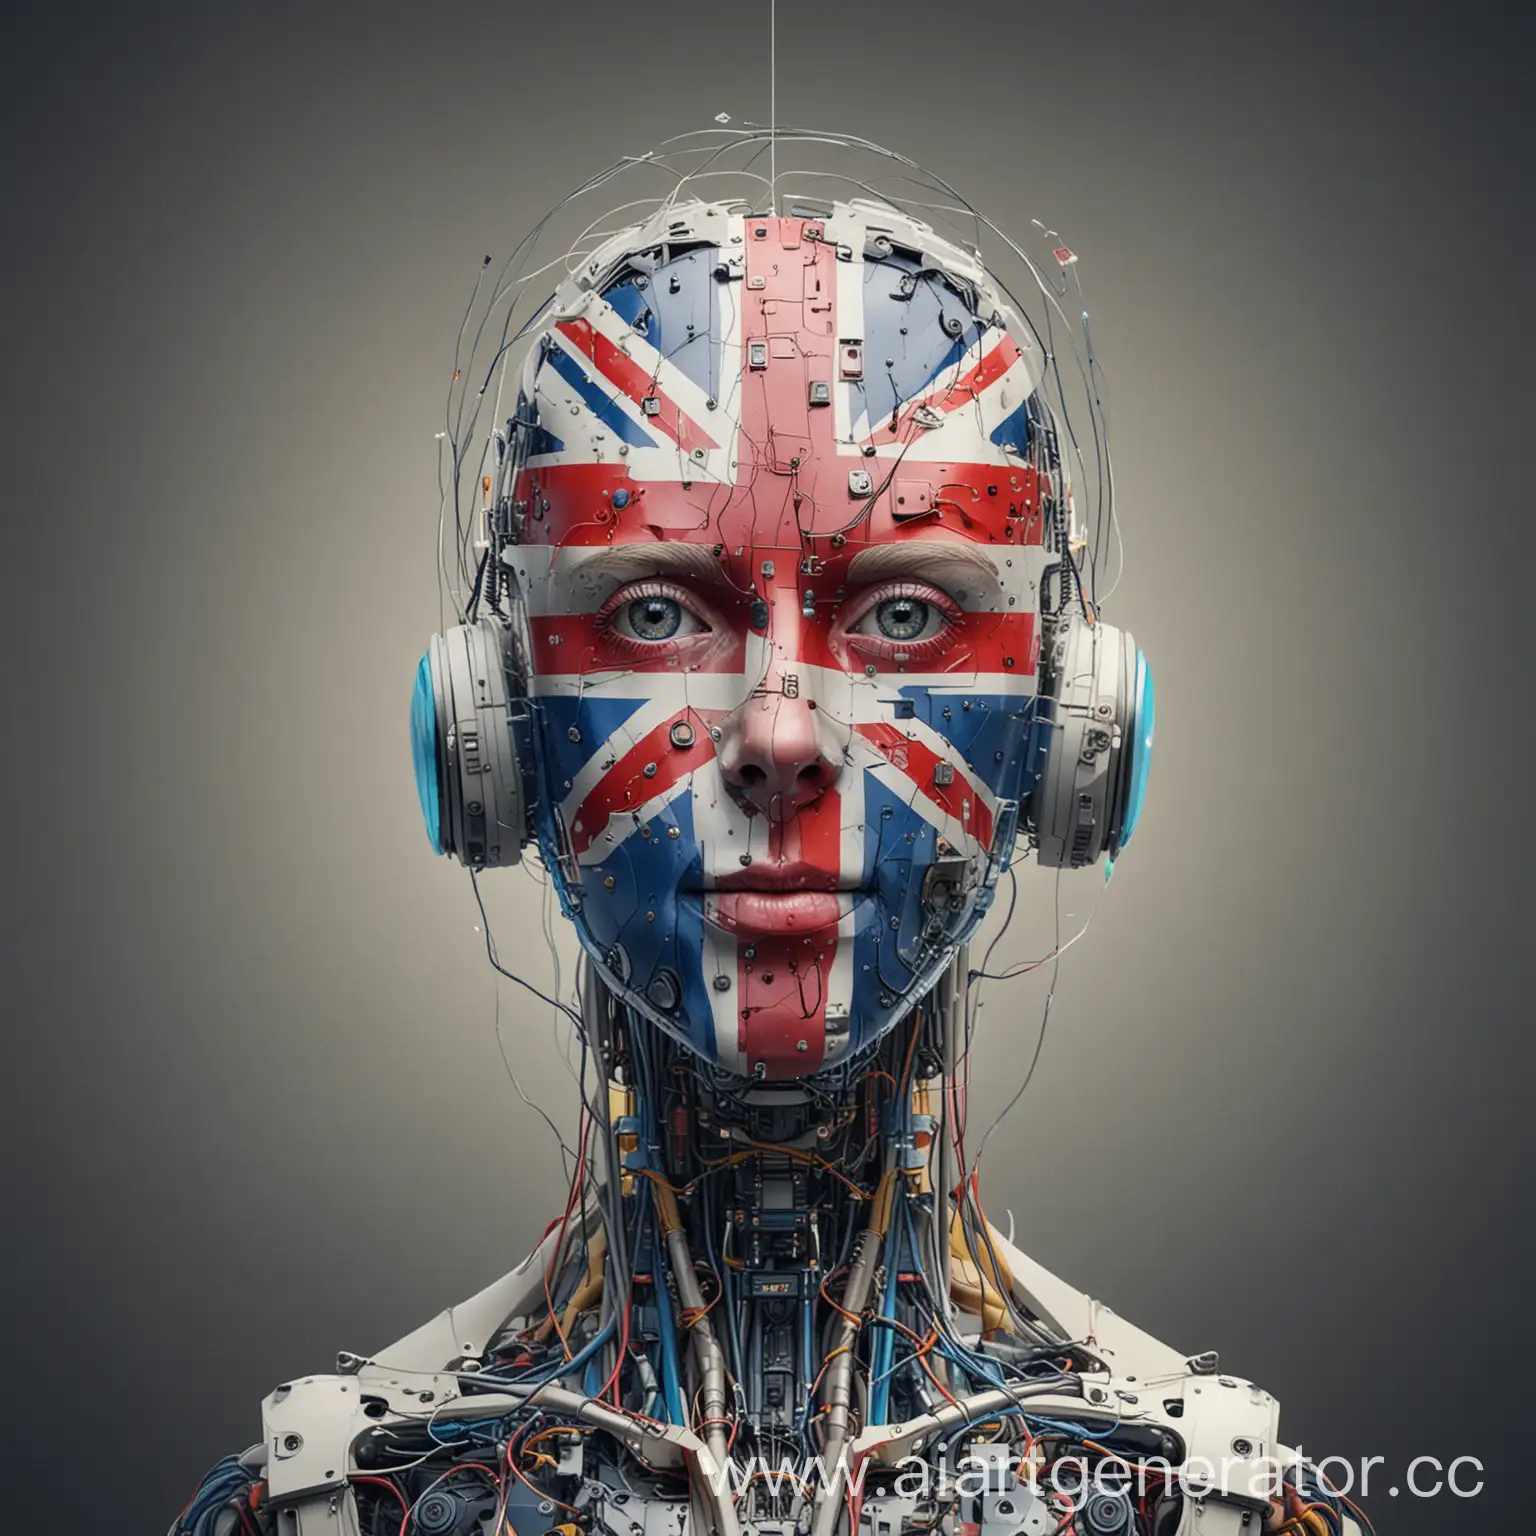 UK-Governments-Vision-for-Global-AI-Innovation-Development